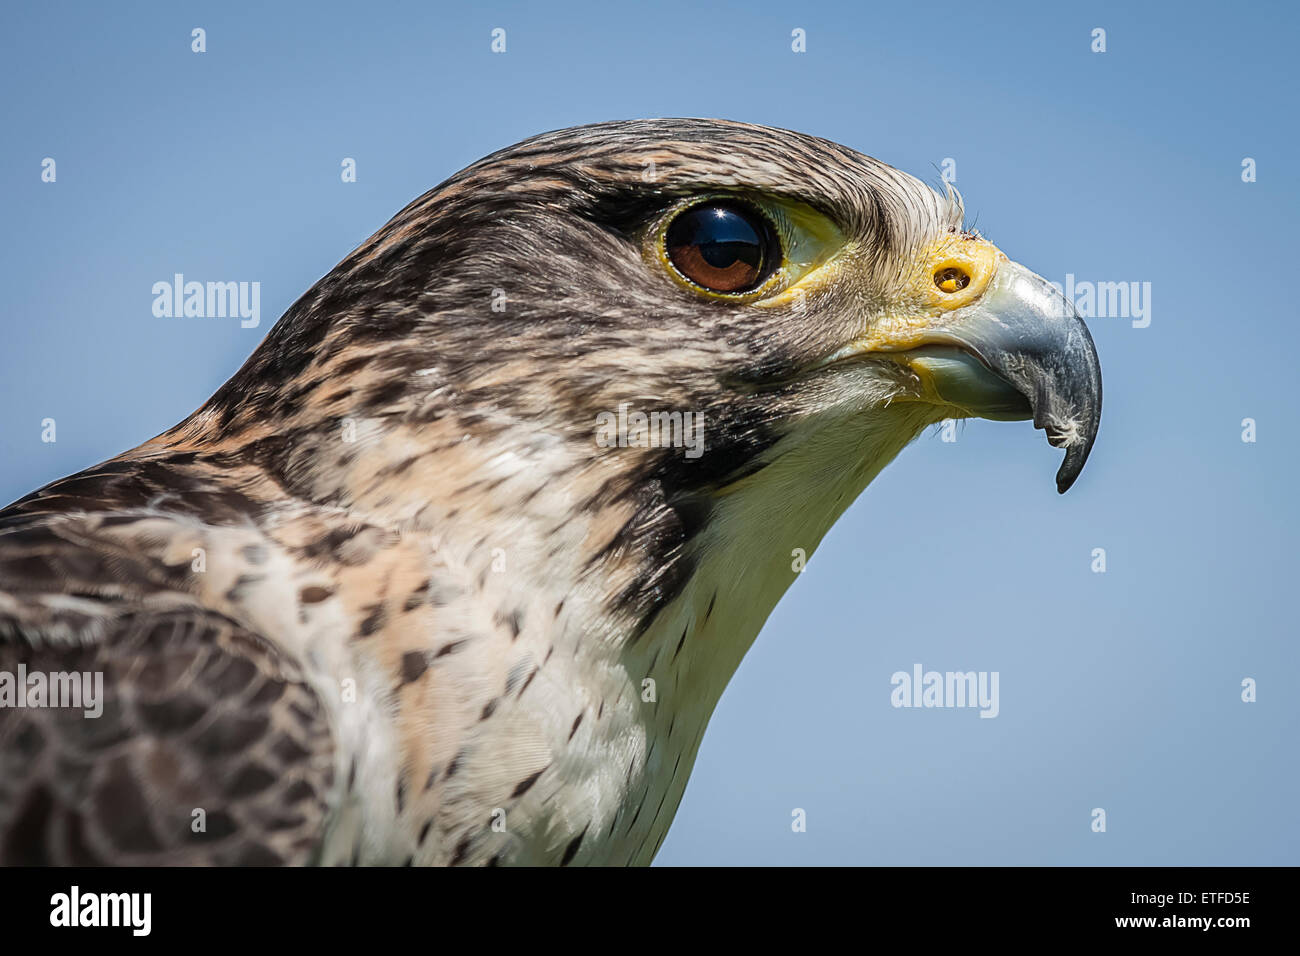 A very close up profile portrait of the head of a saker falcon Stock Photo